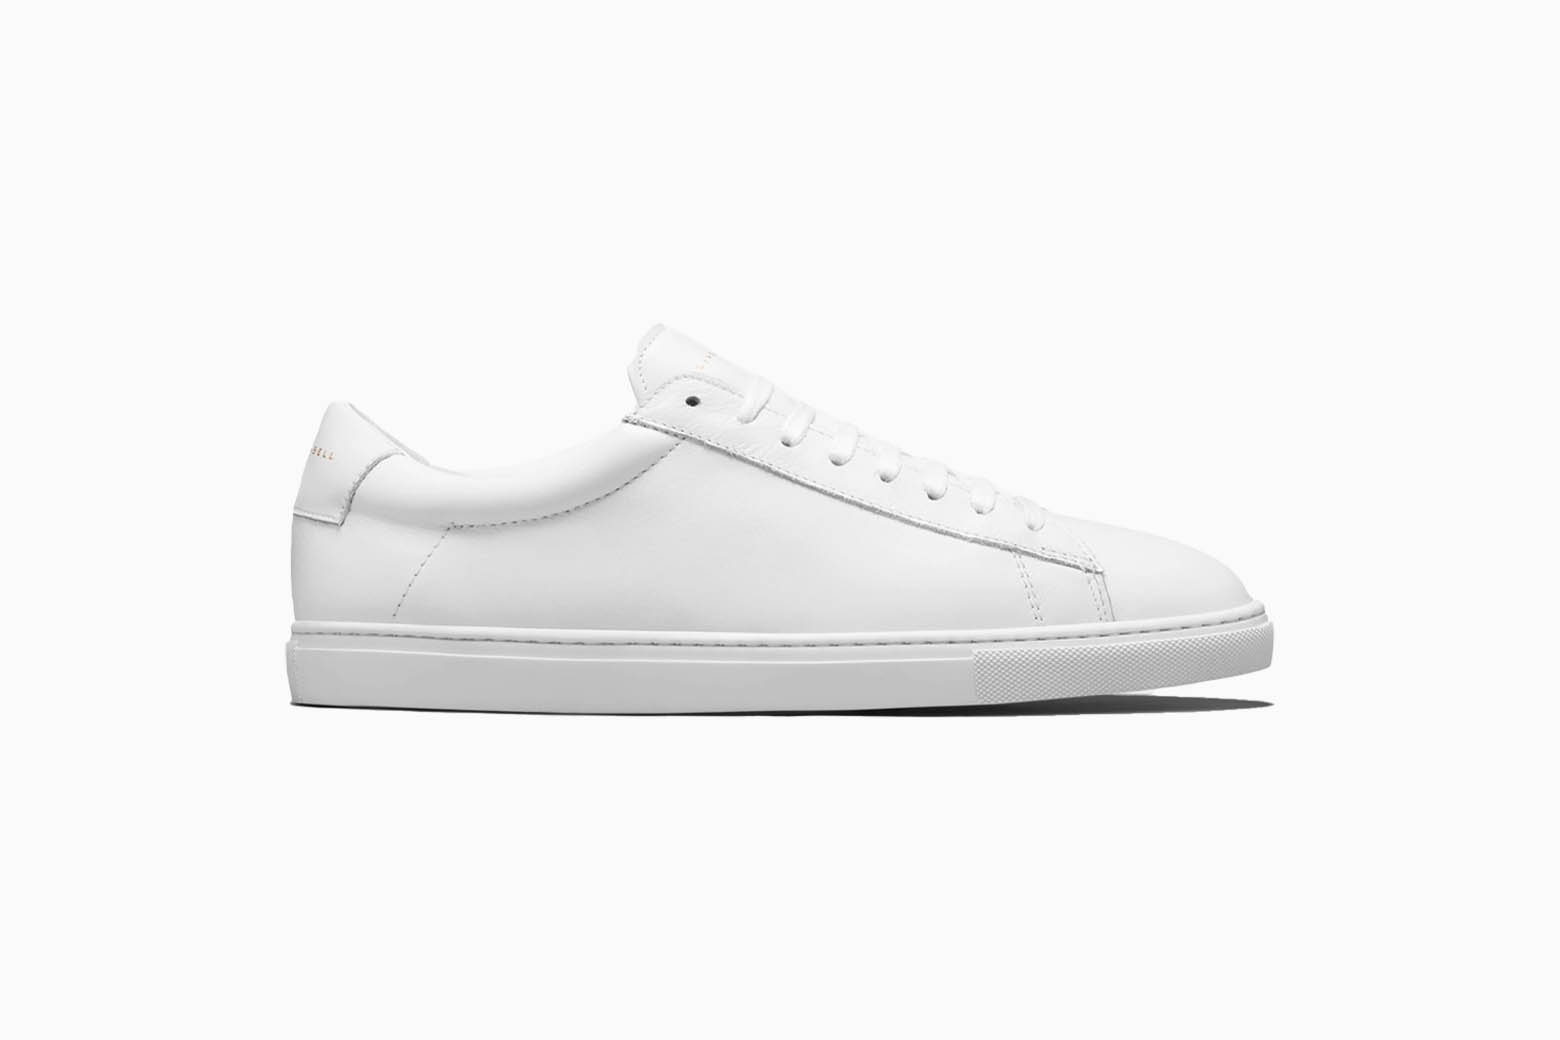 The Best White Sneakers Stylish Women Need Style Guide 5320